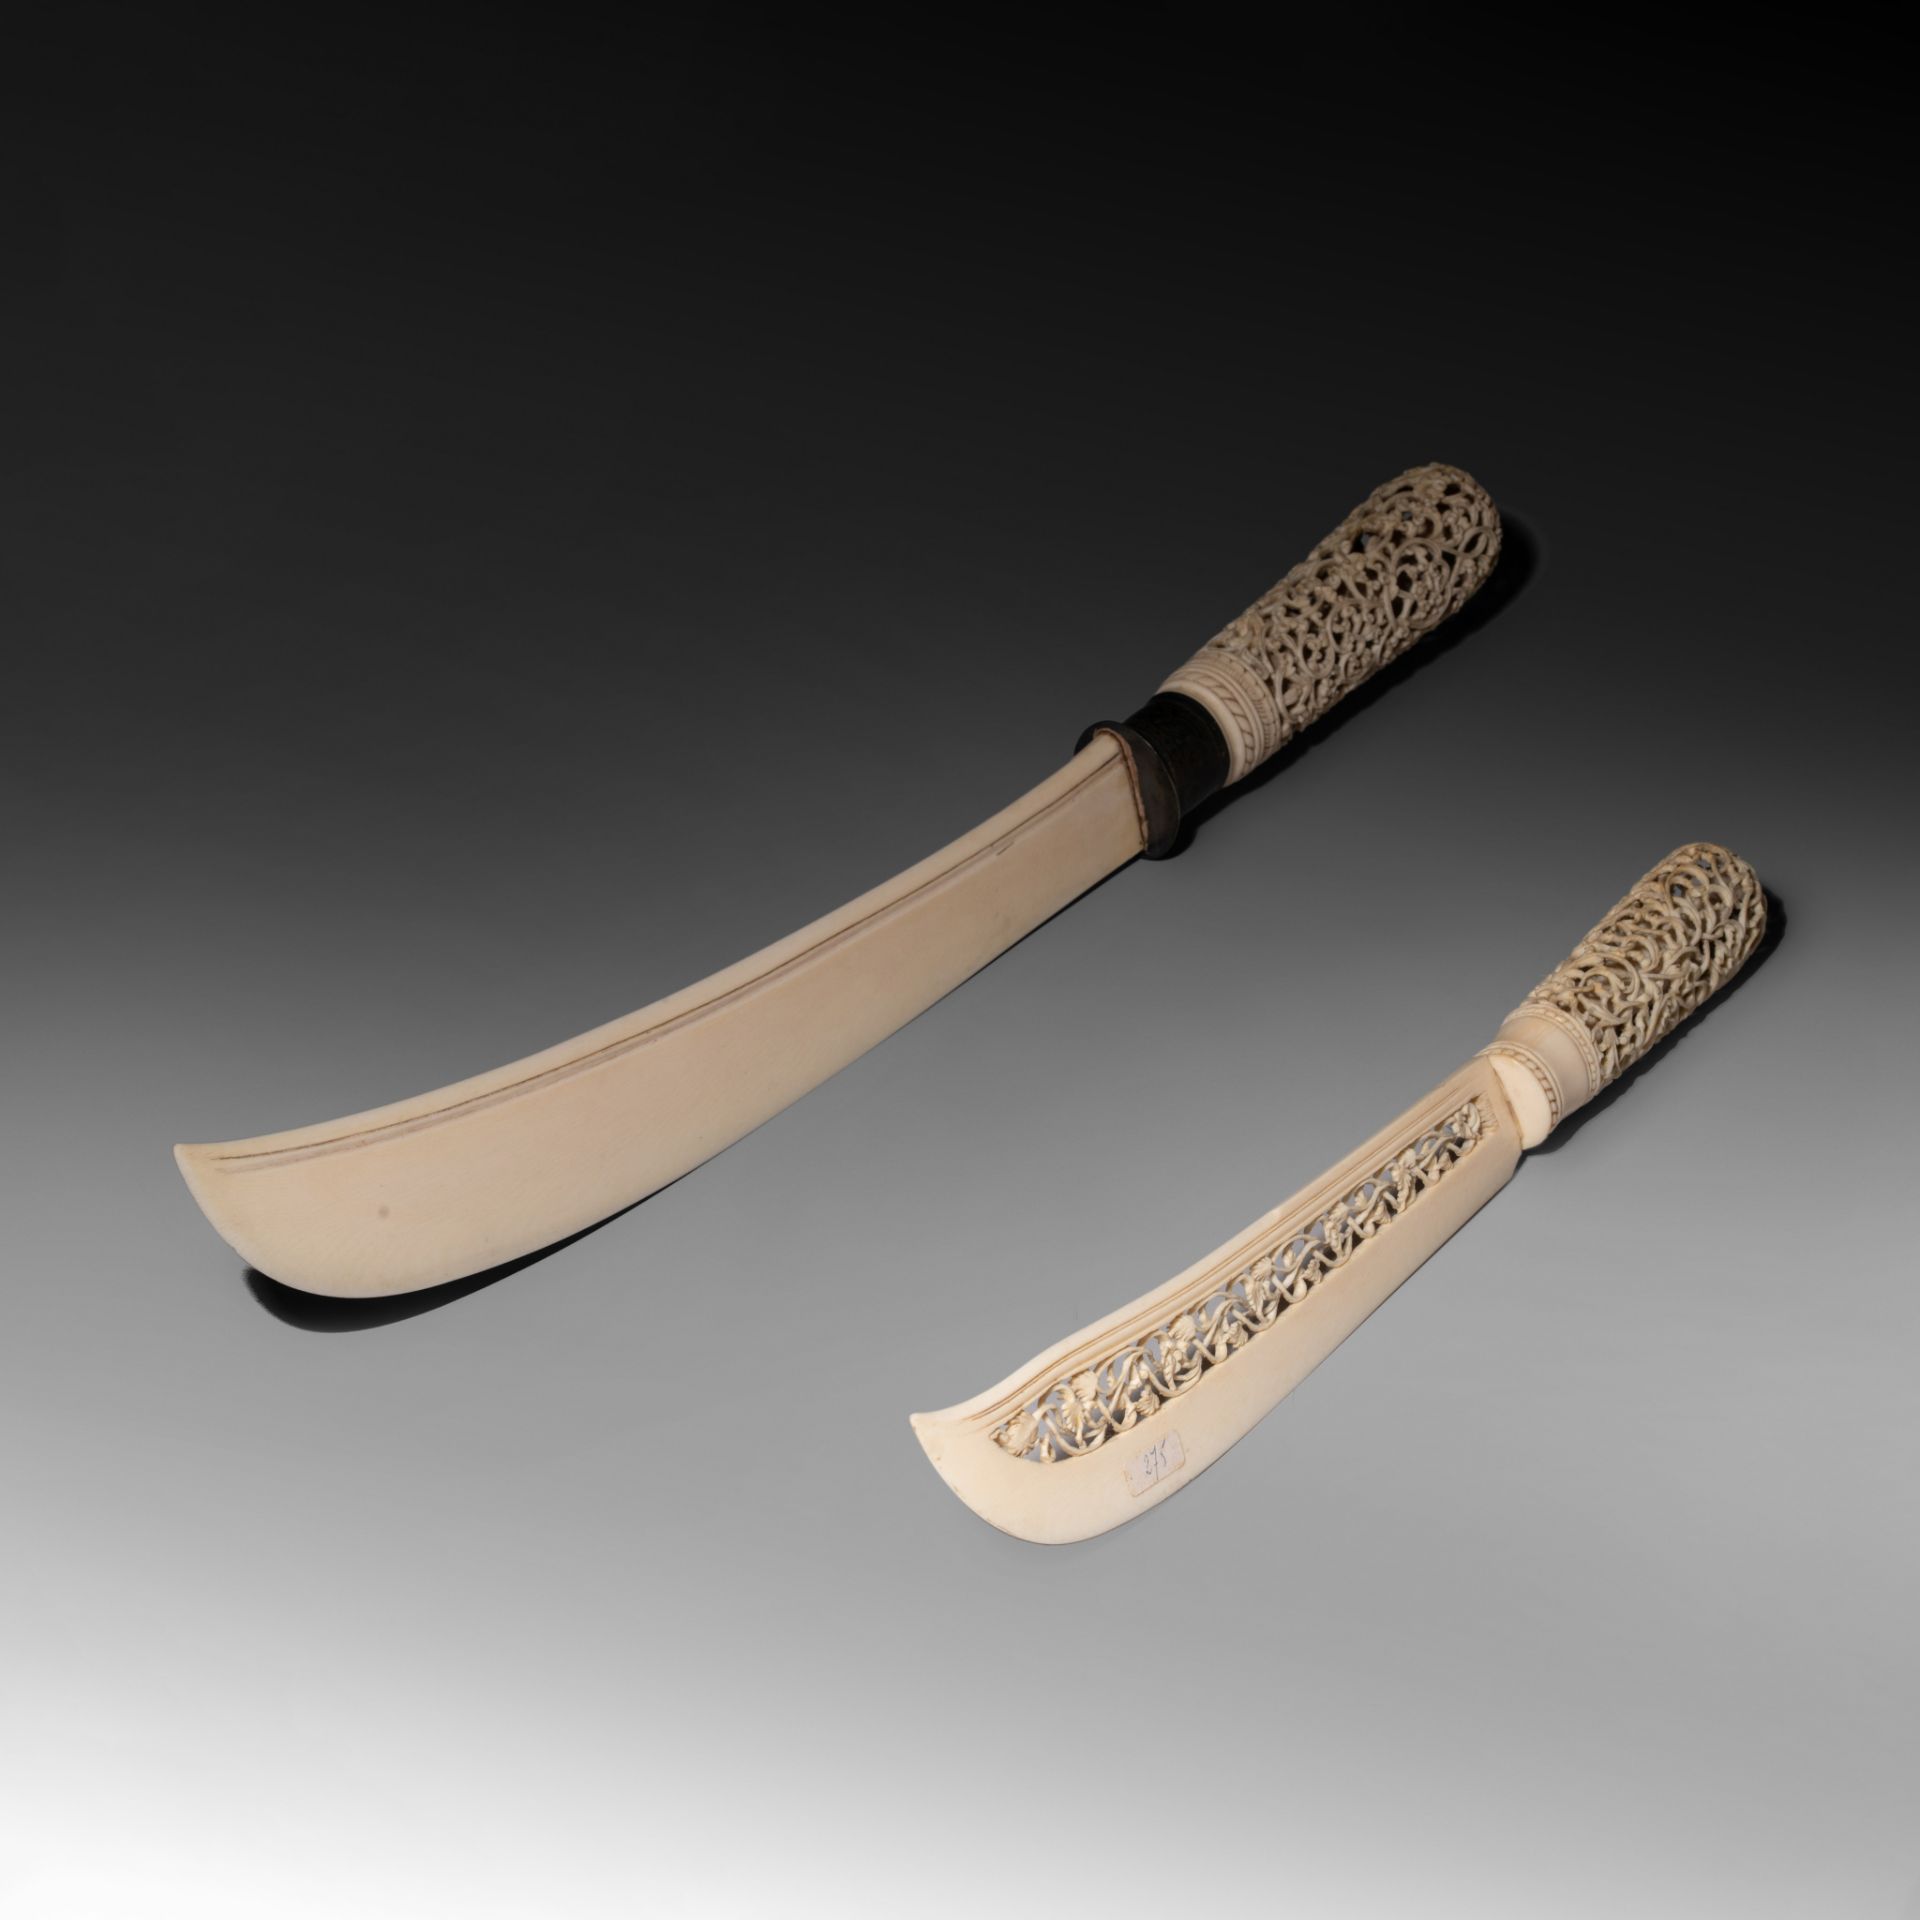 Two Burmese Colonial Ivory paperknives, L 51 cm - 200 g / L 35,8 cm - 80 g, both items are 19th or e